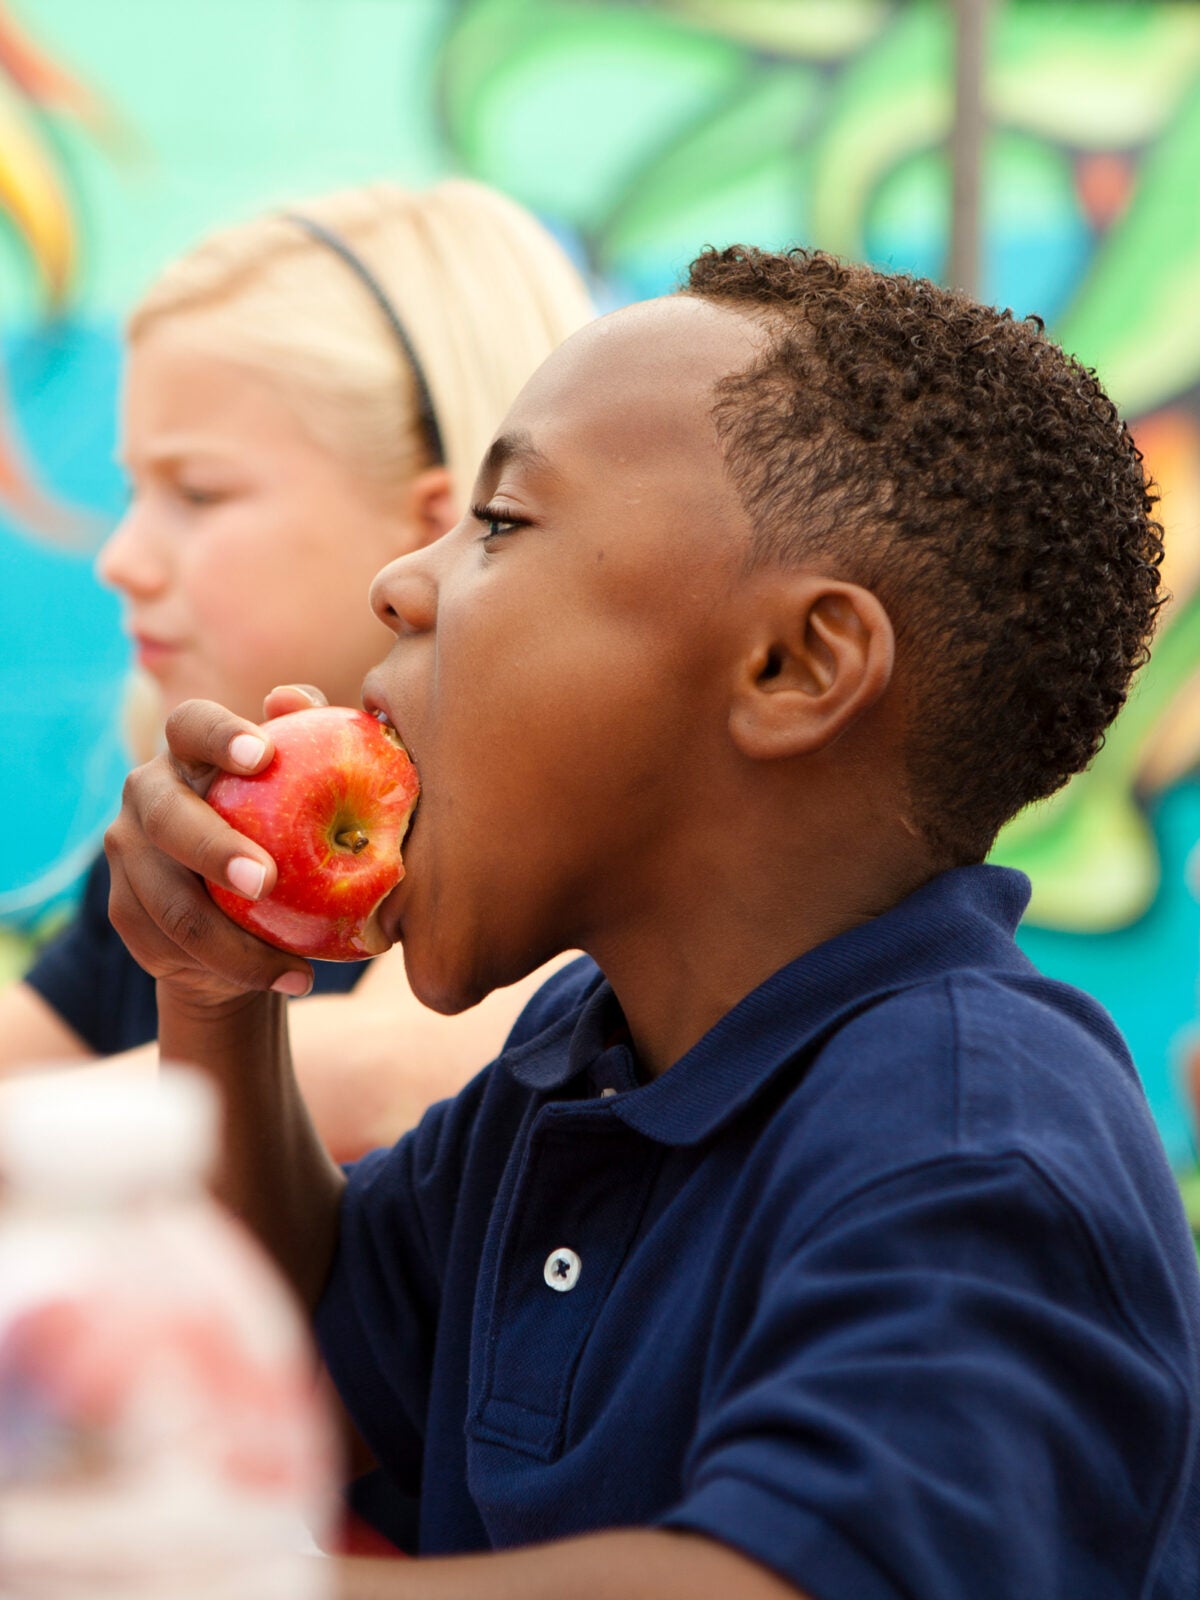 Two elementary-aged children eat apples in a school cafeteria. They are wearing blue-polo shirts and there is a bright mural in the background.